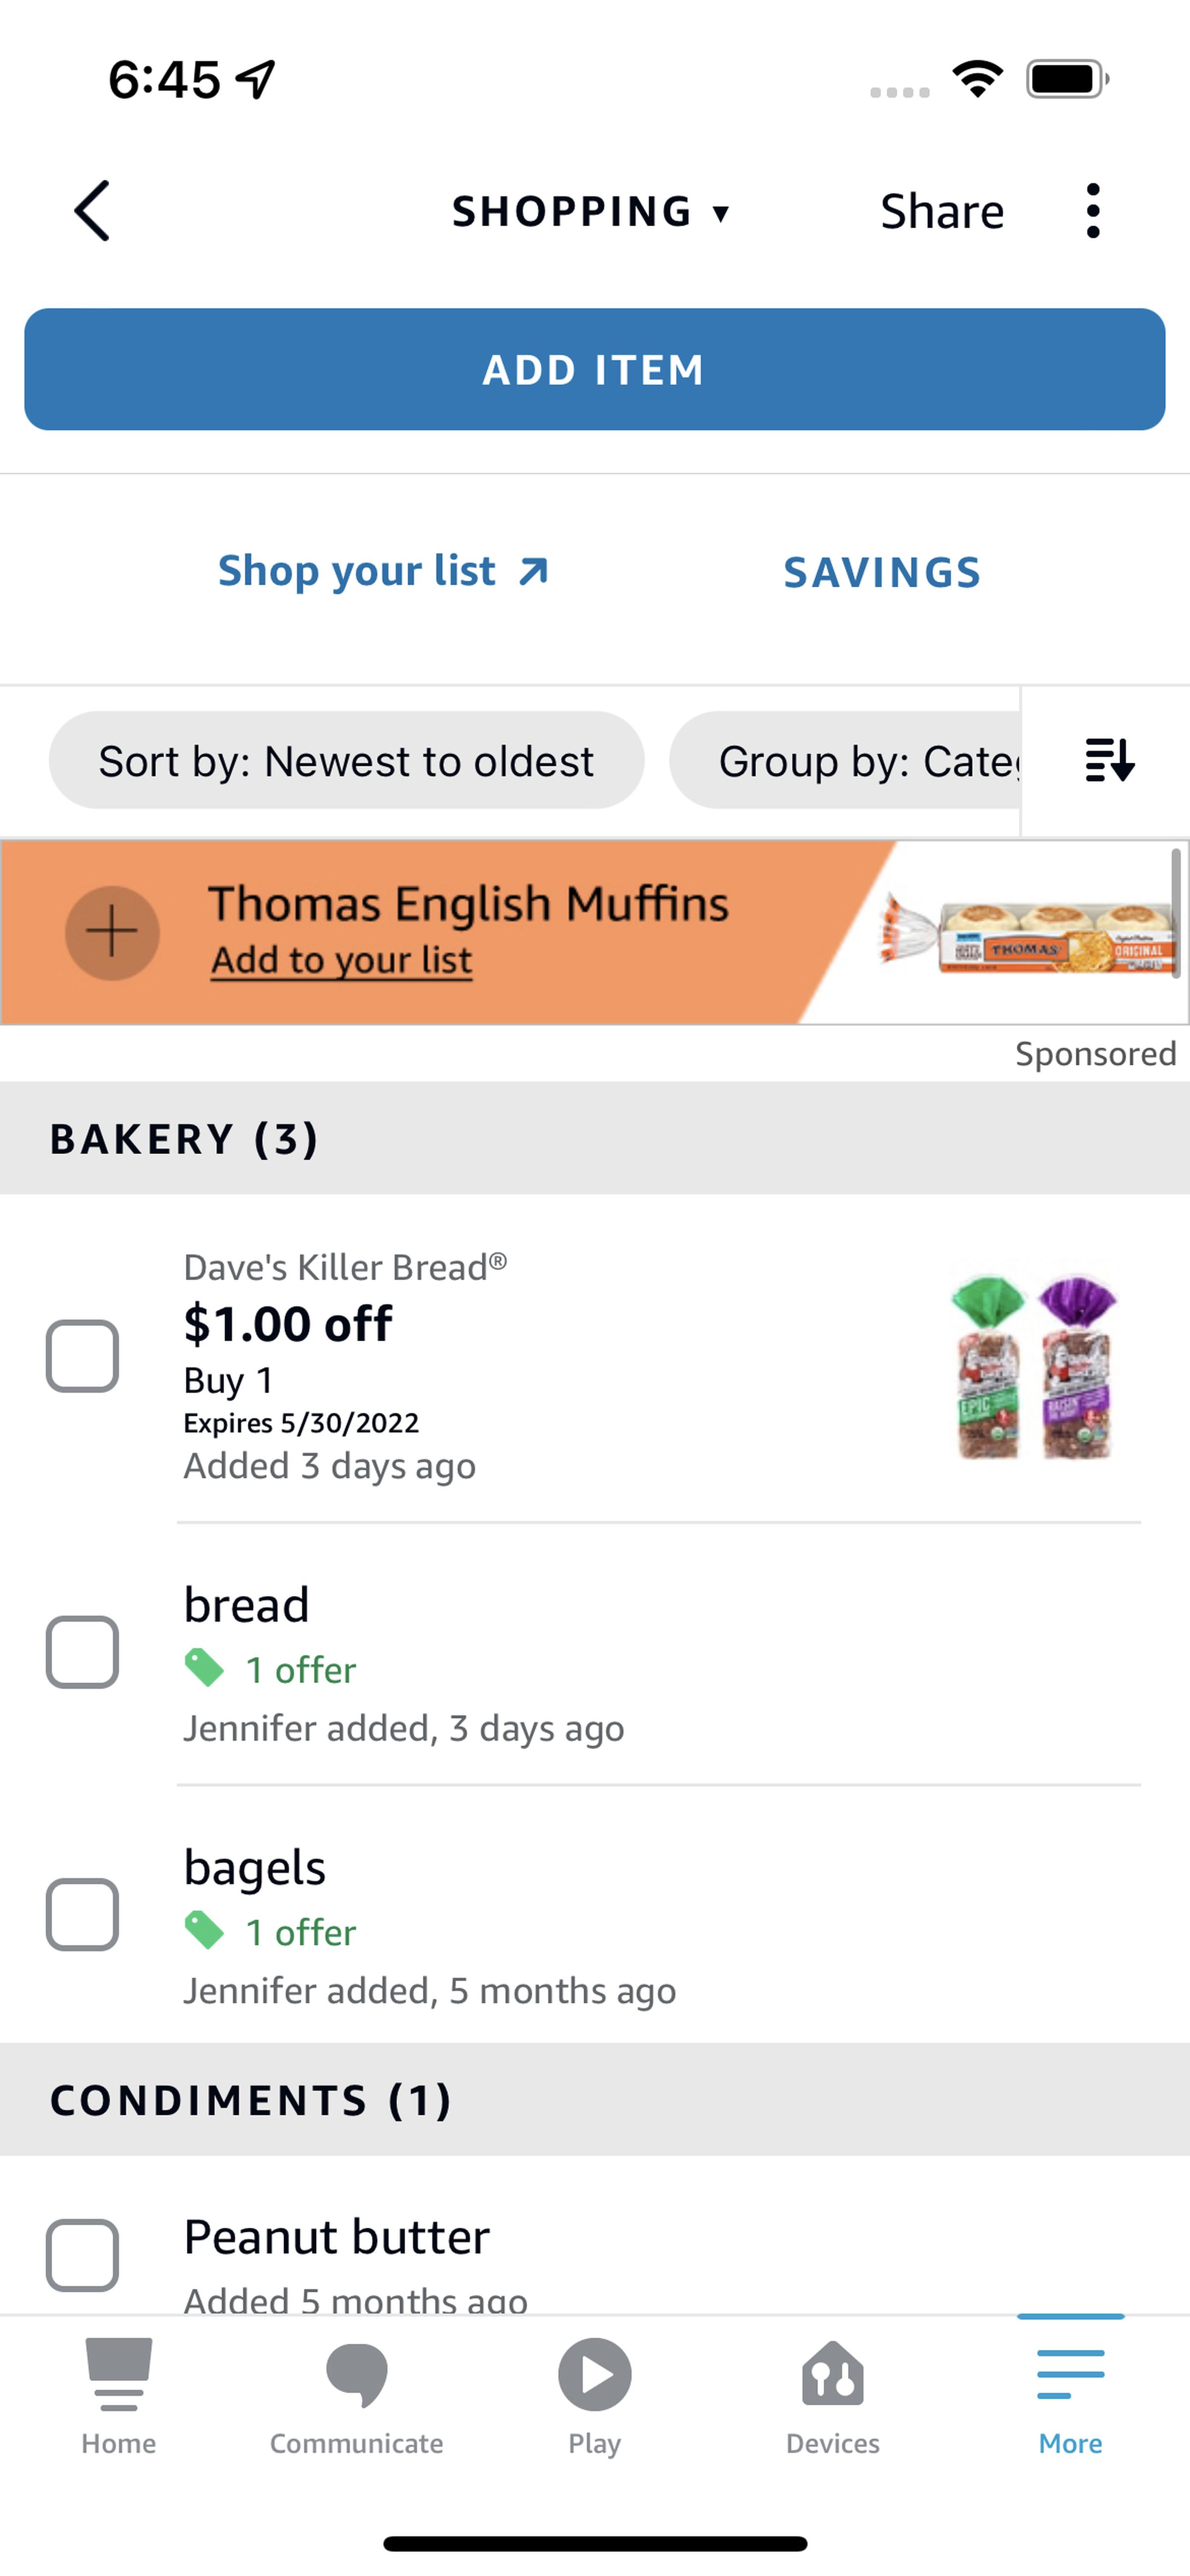 How the coupons appear in the Alexa shopping list.